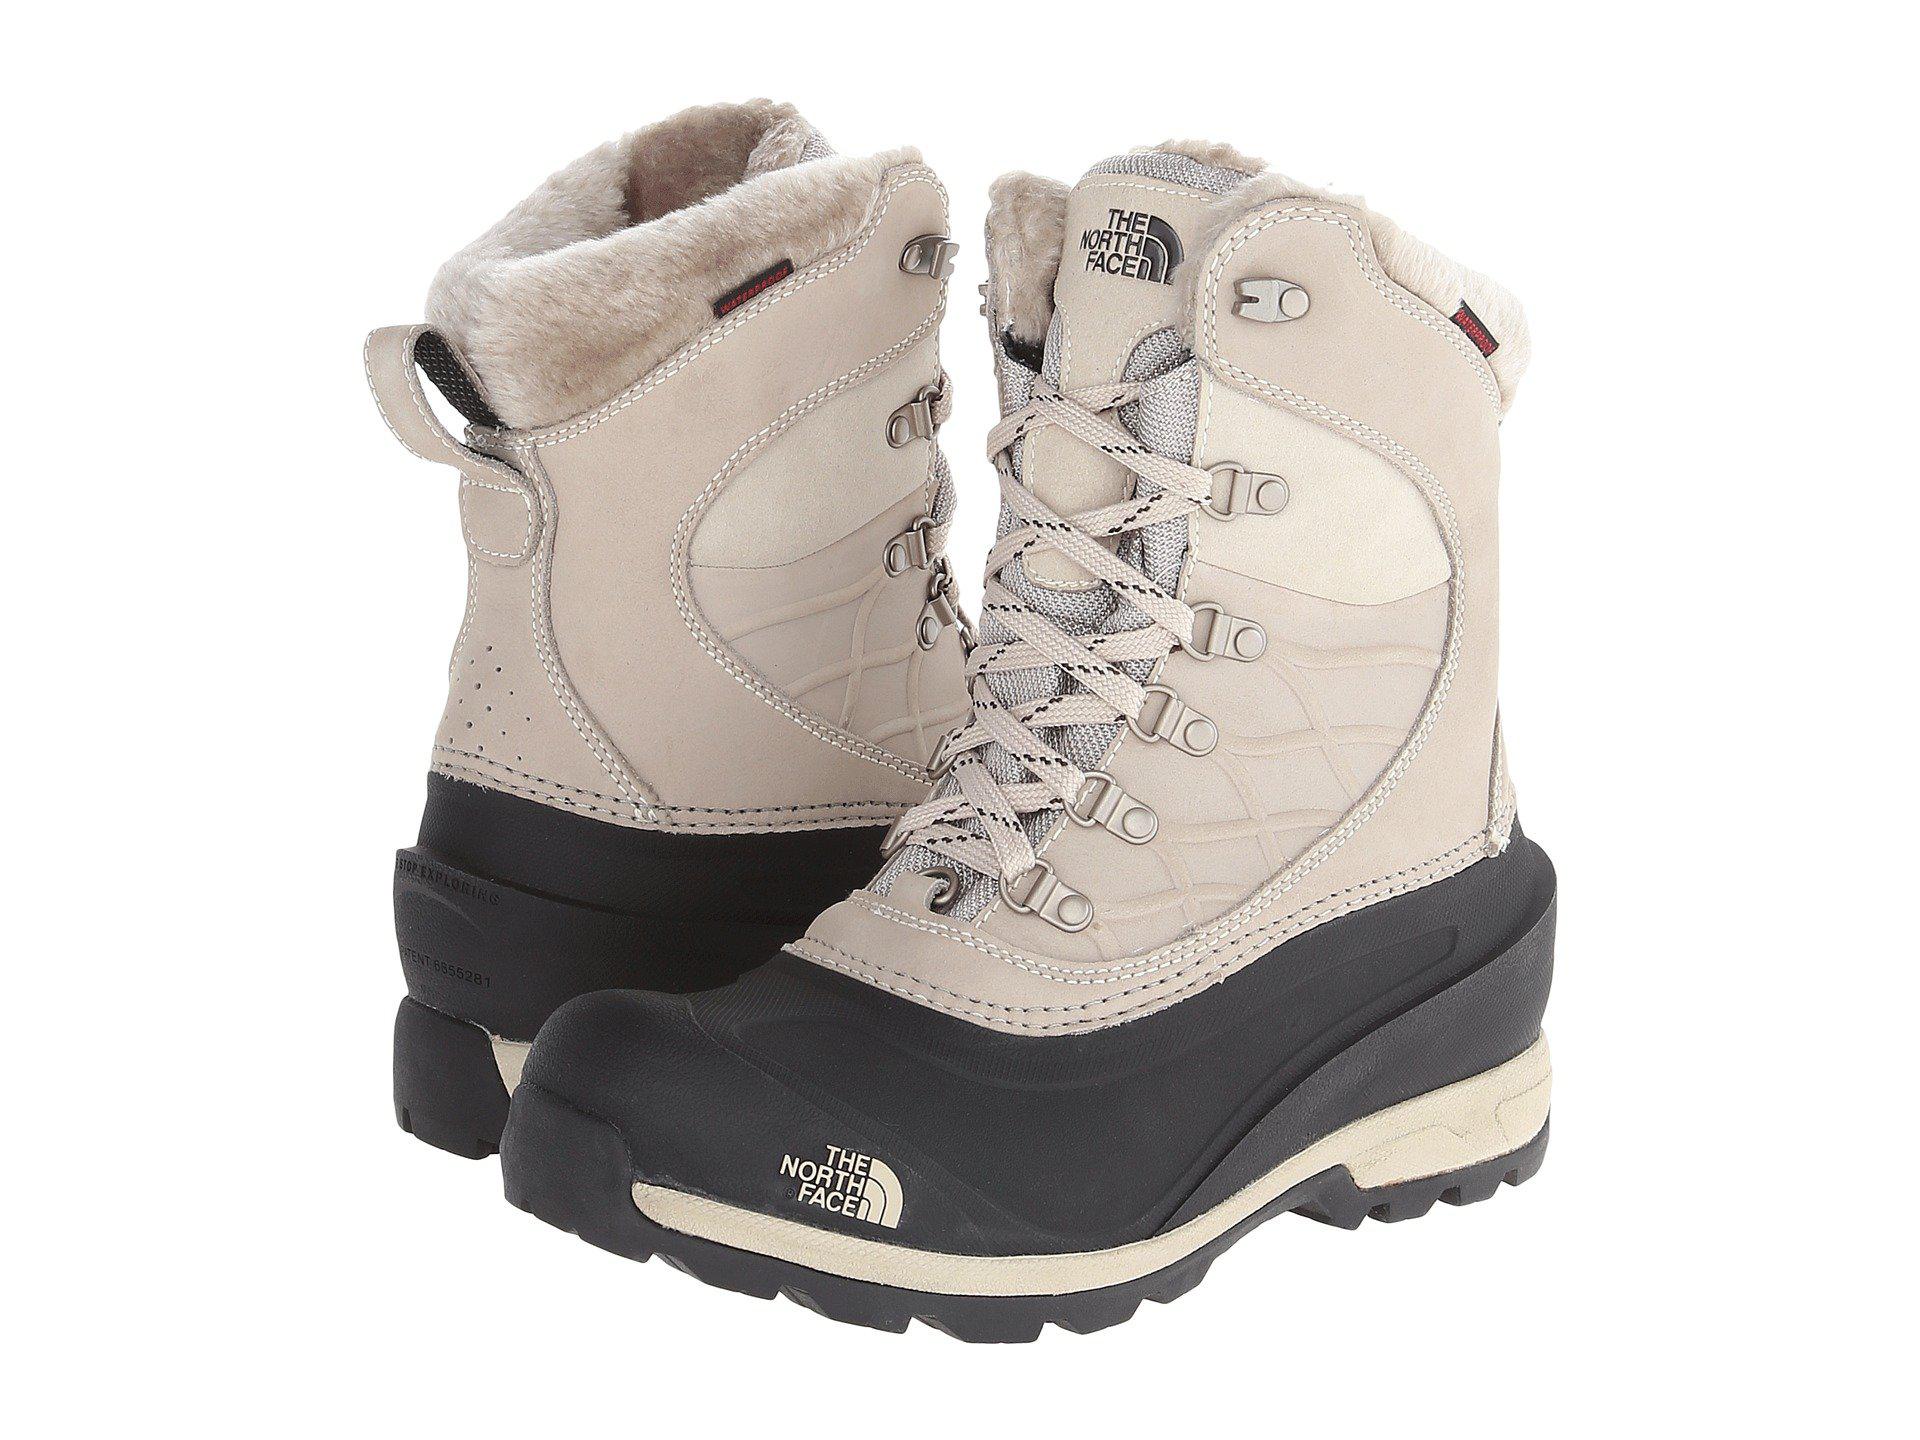 The North Face Chilkat 400 in Brown - Lyst